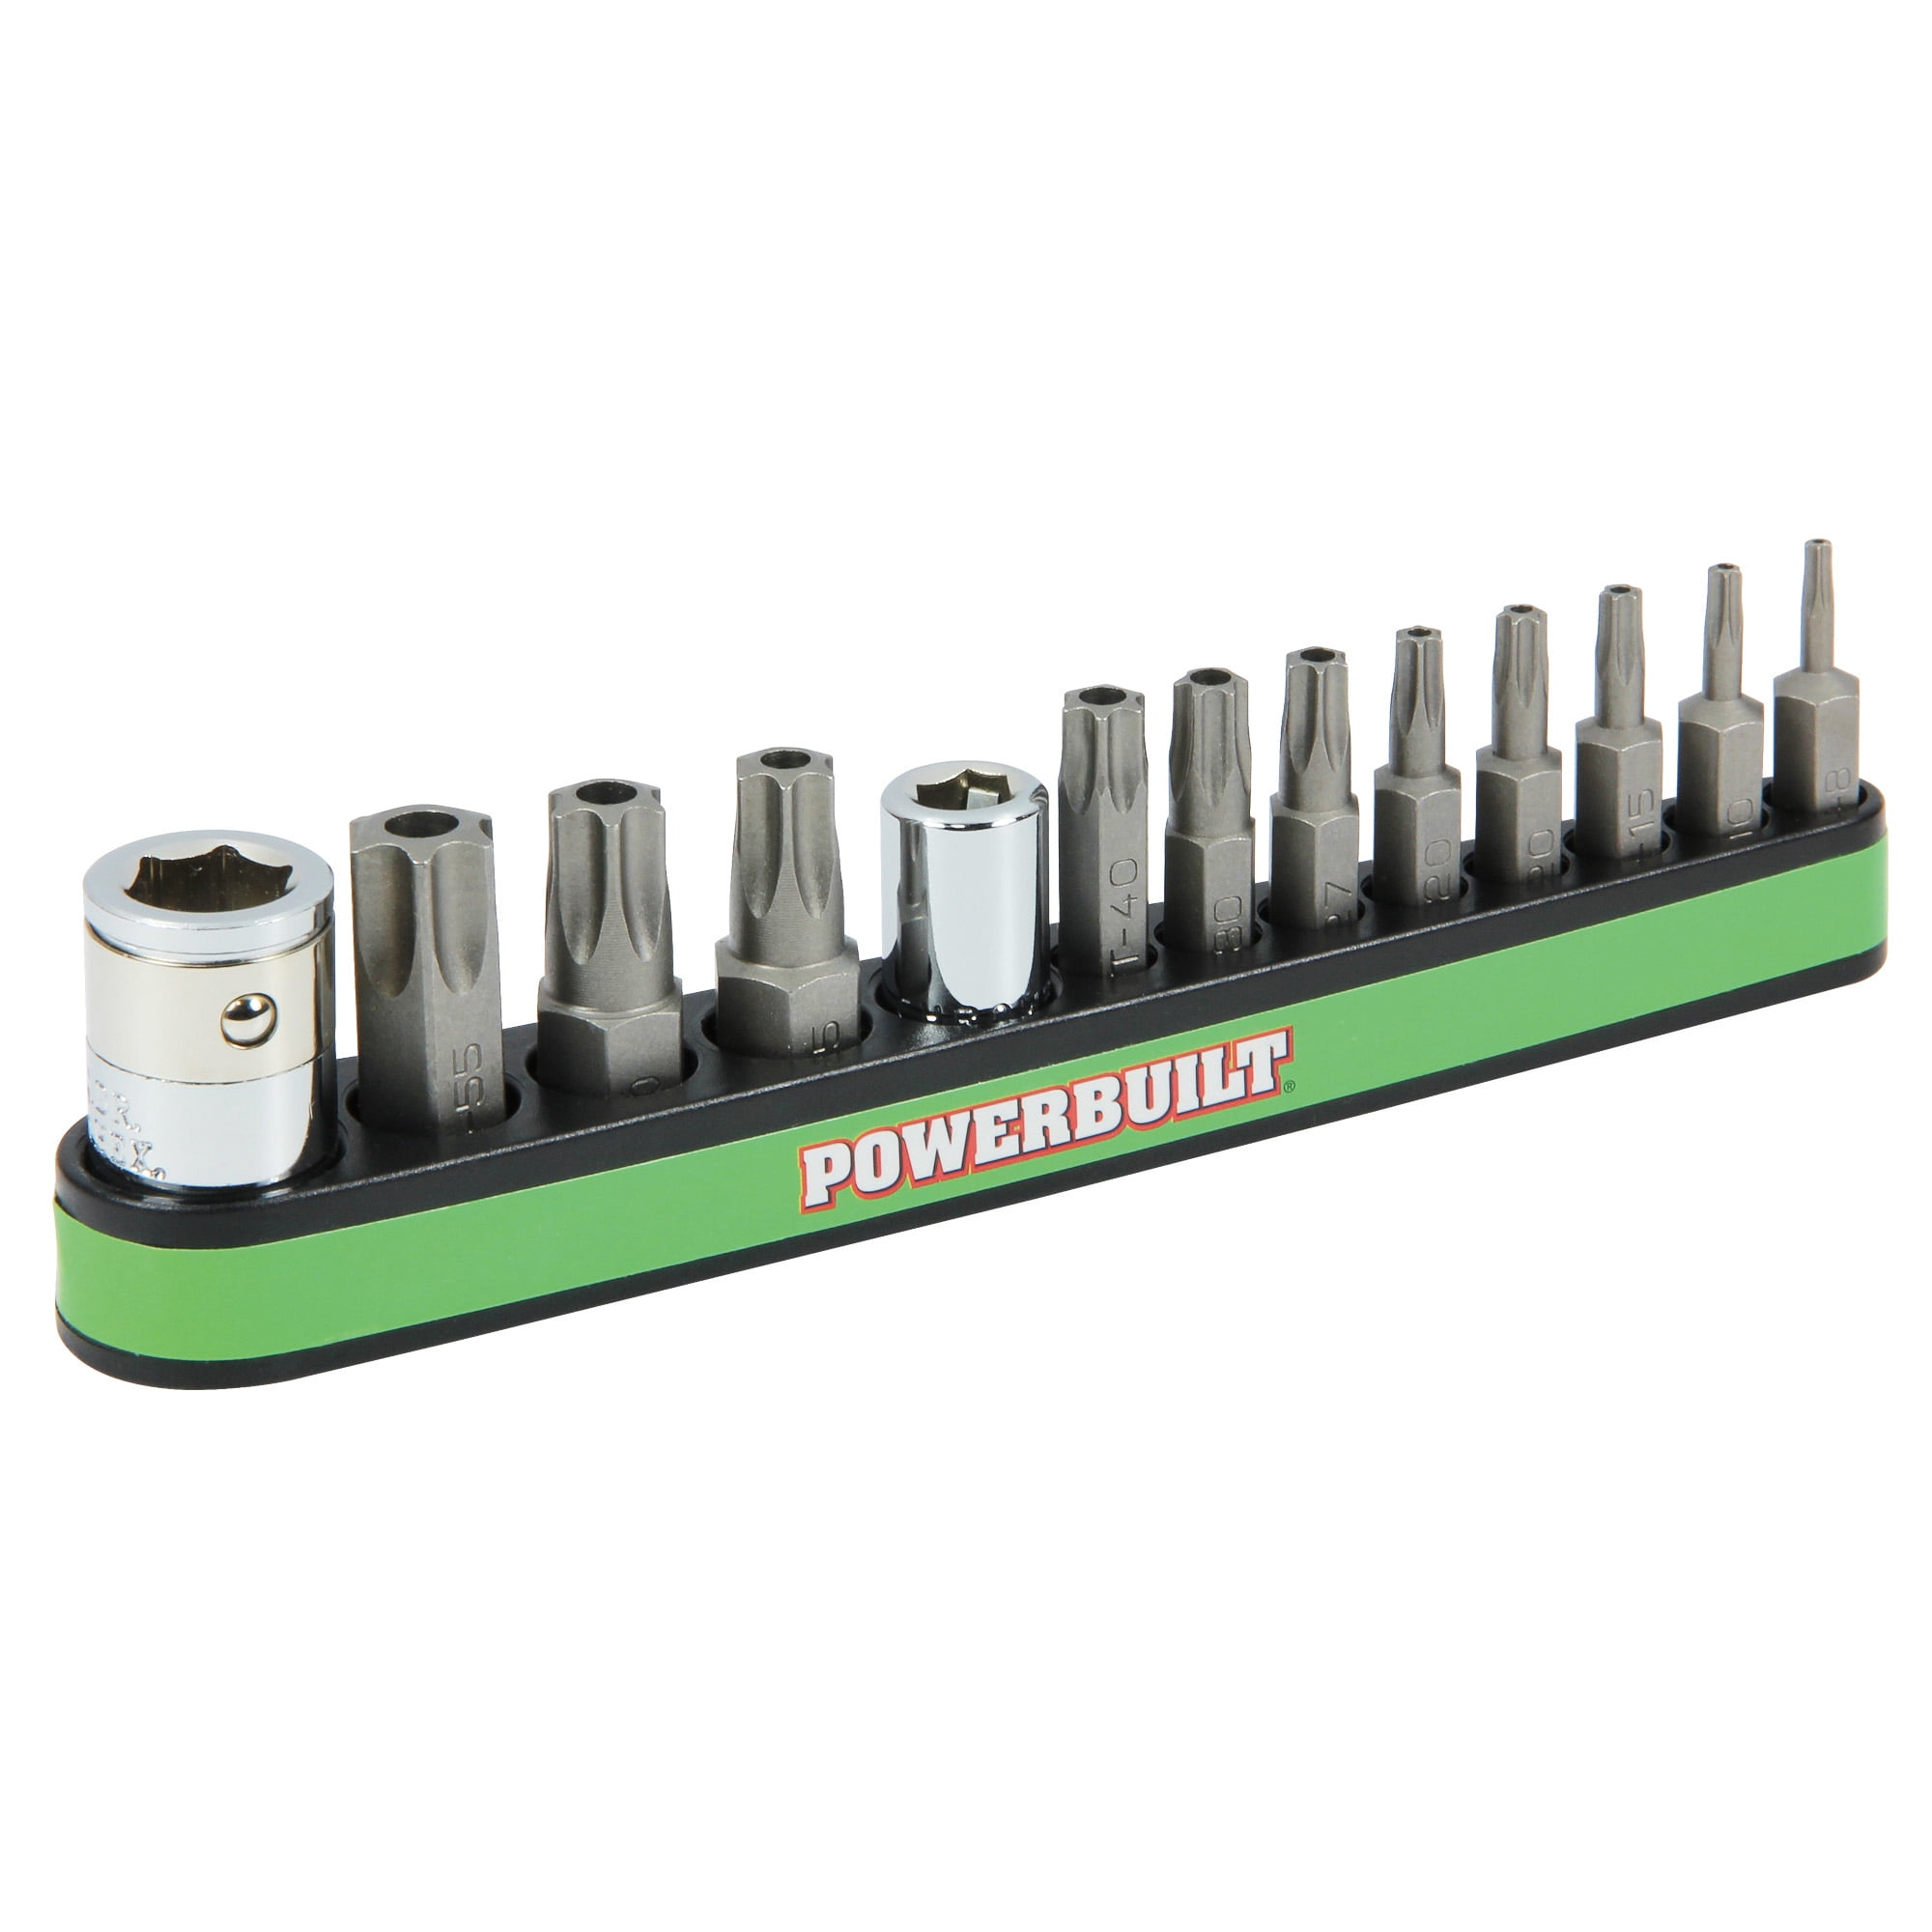 Powerbuilt 13 Piece Tamper Proof Star Bit with Magnetic Base Holder T-8 to T-40 